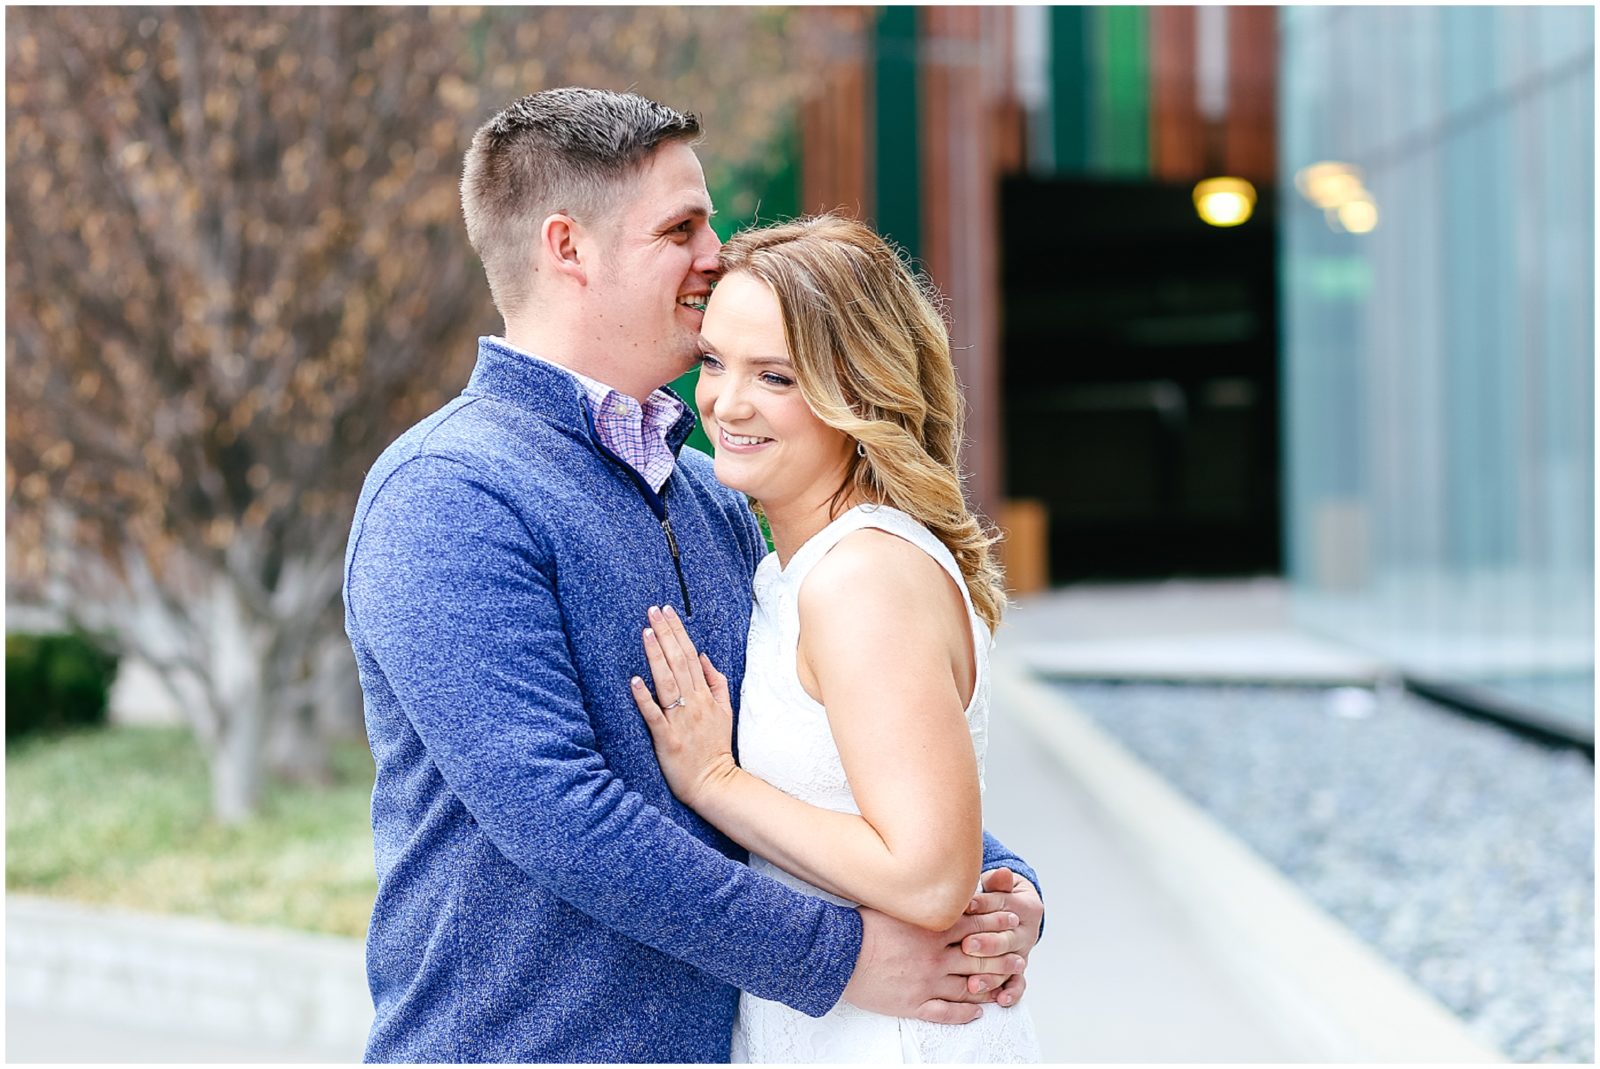 laughing couple - pose ideas - what to wear to engagement session 